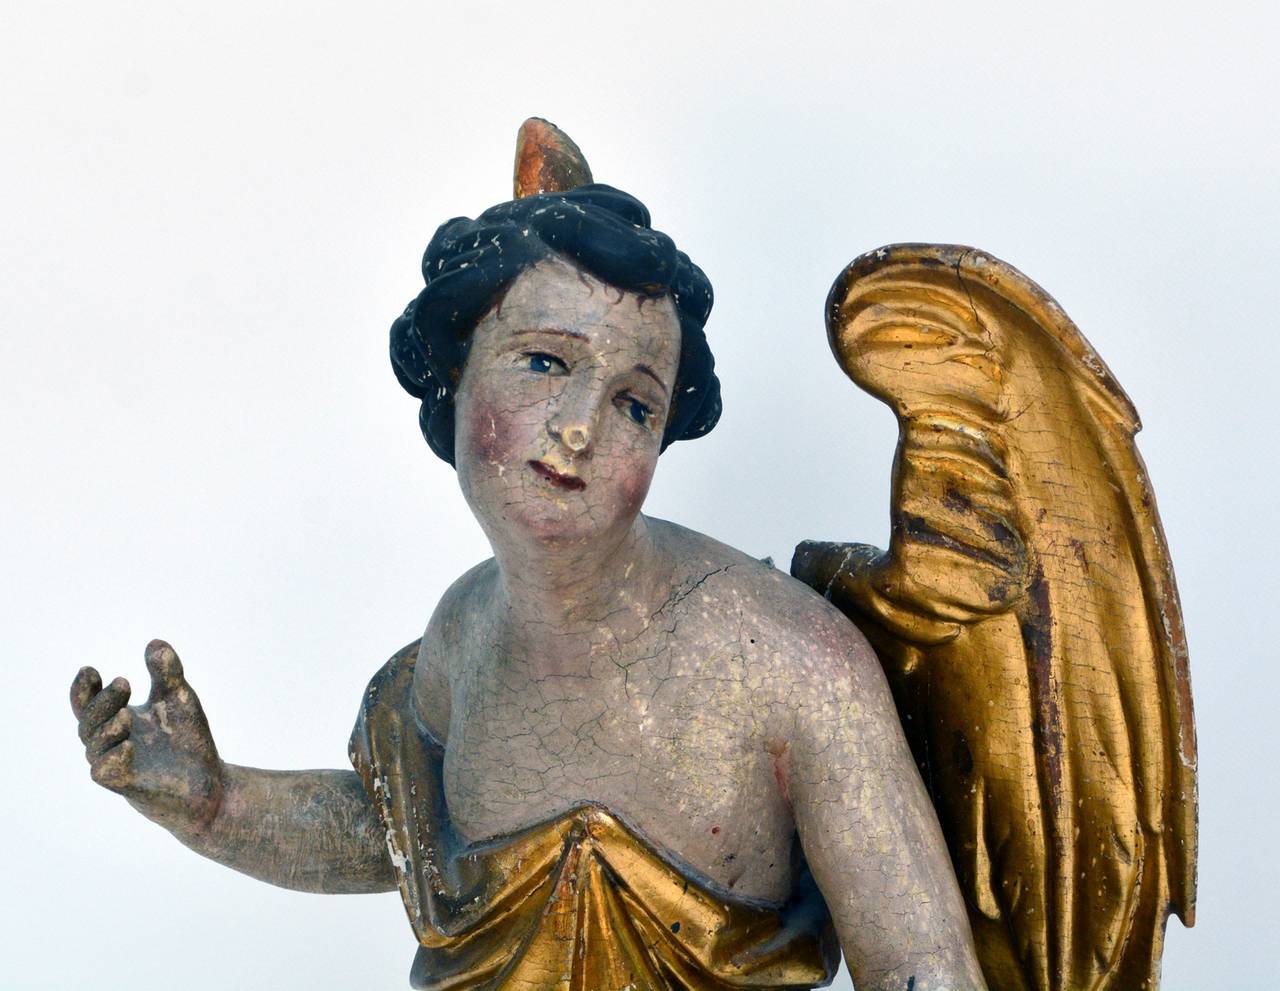 Baroque Era Sculpture of an Angel, Swabia, 1700s, partially gilded.

Detailed sculpture of an angel which is leaning forward with perspectively formed eyes. This indicates a position of this sculpture above the altar.

Provenance of Swabia, a